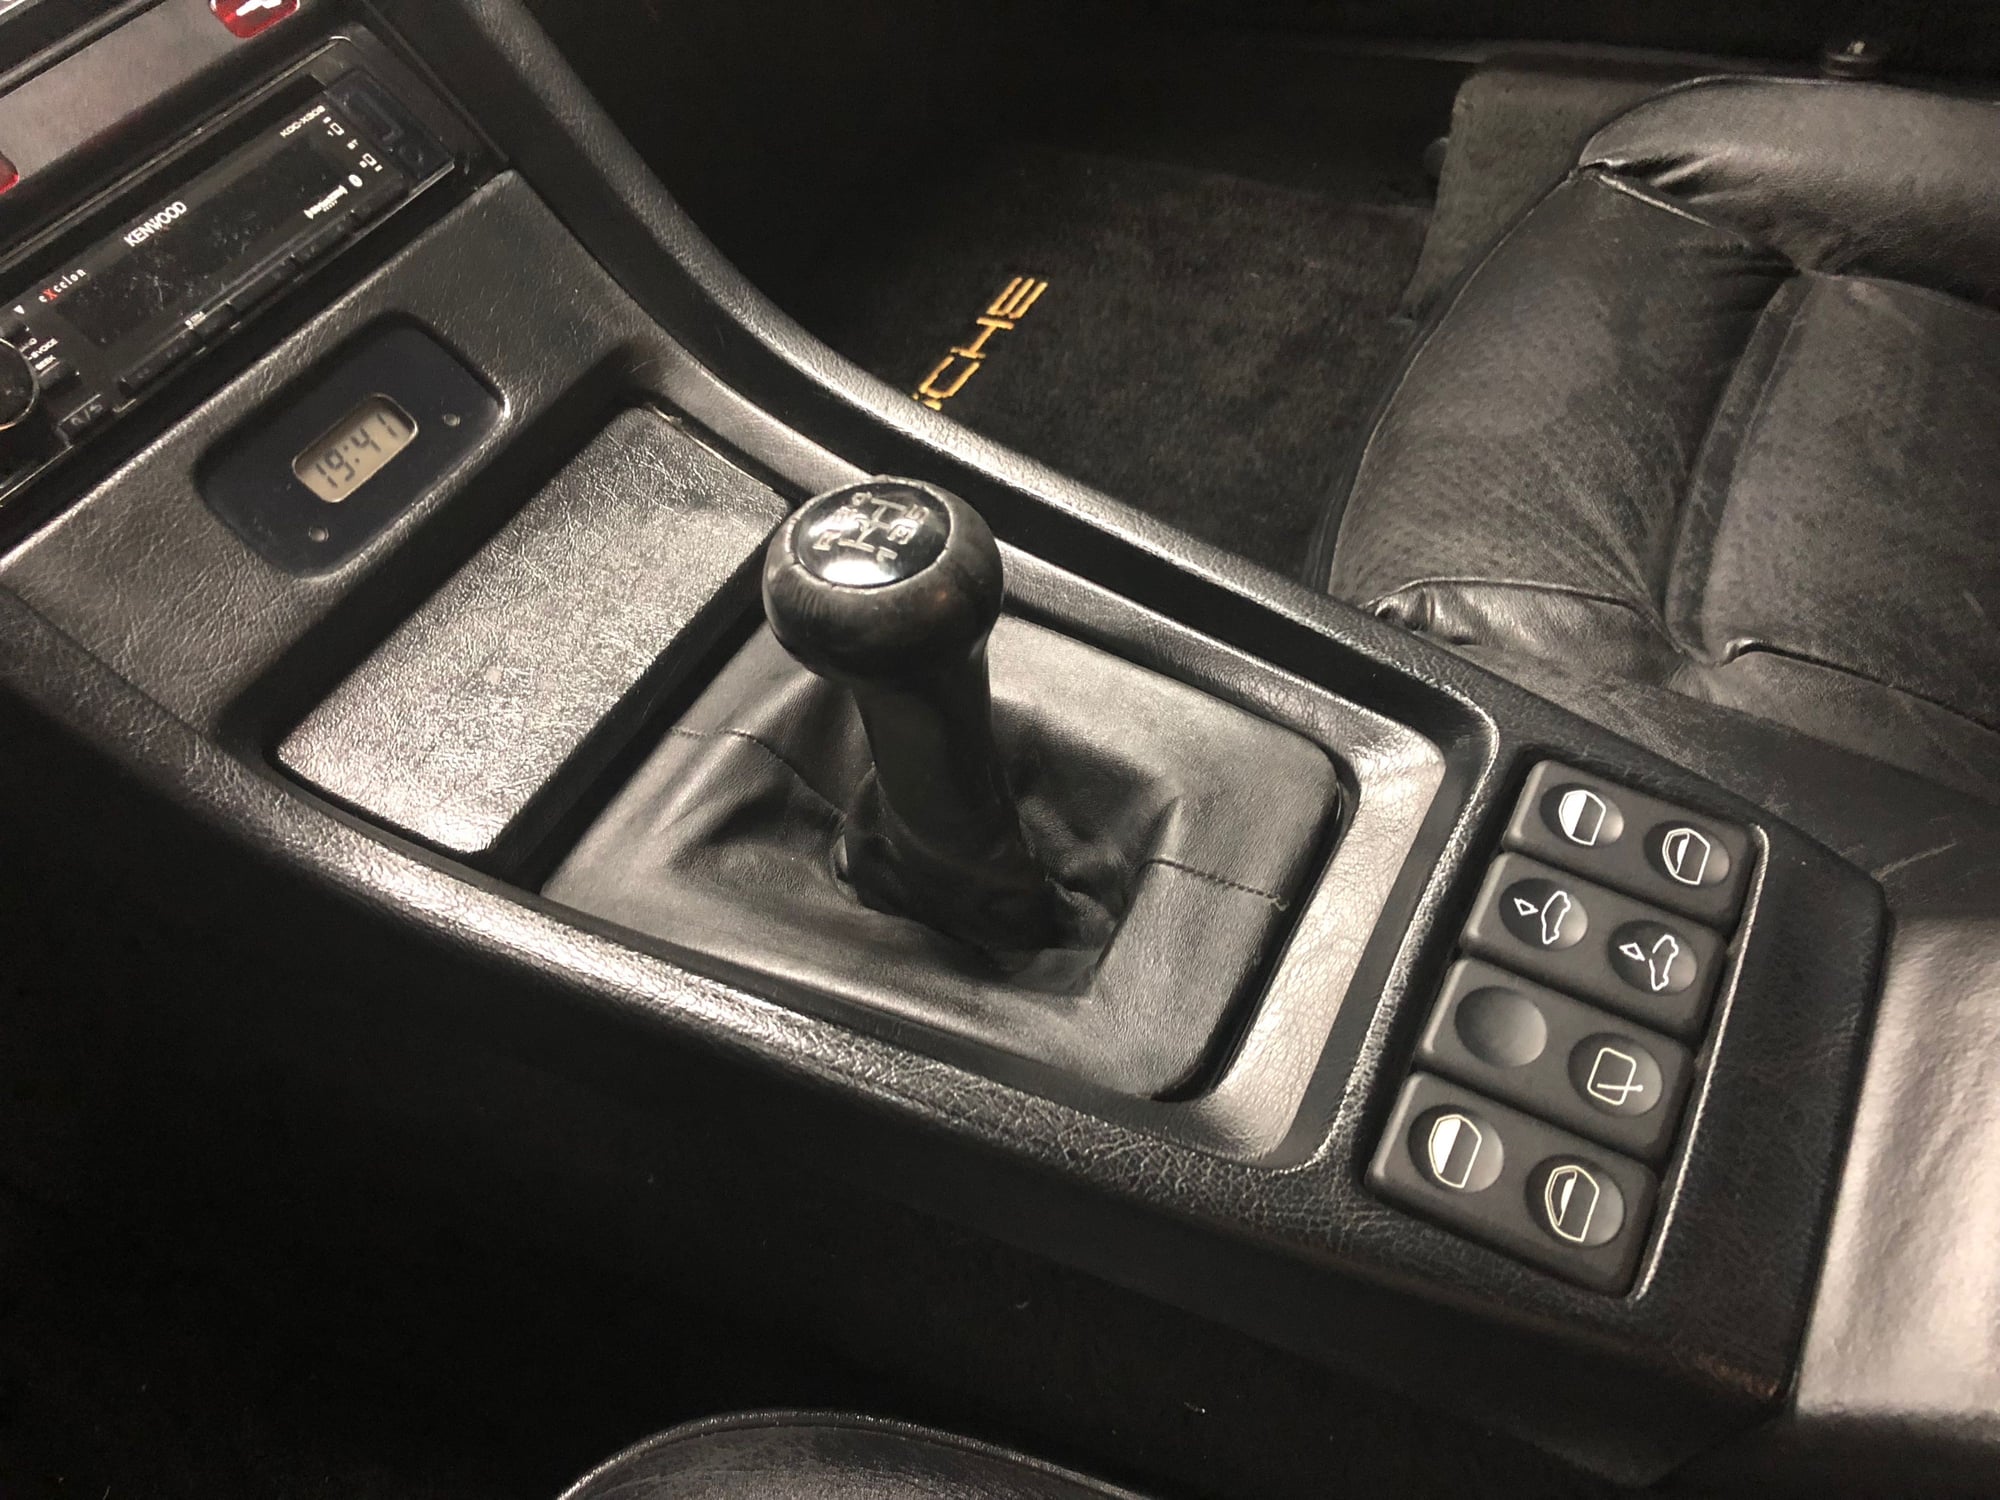 1987 Porsche 928 - 1987 S4 (Black on black with a 5 speed) - Used - VIN WP0JB0920HS862105 - 82,431 Miles - 8 cyl - 2WD - Manual - Coupe - Black - Massapequa, NY 11758, United States